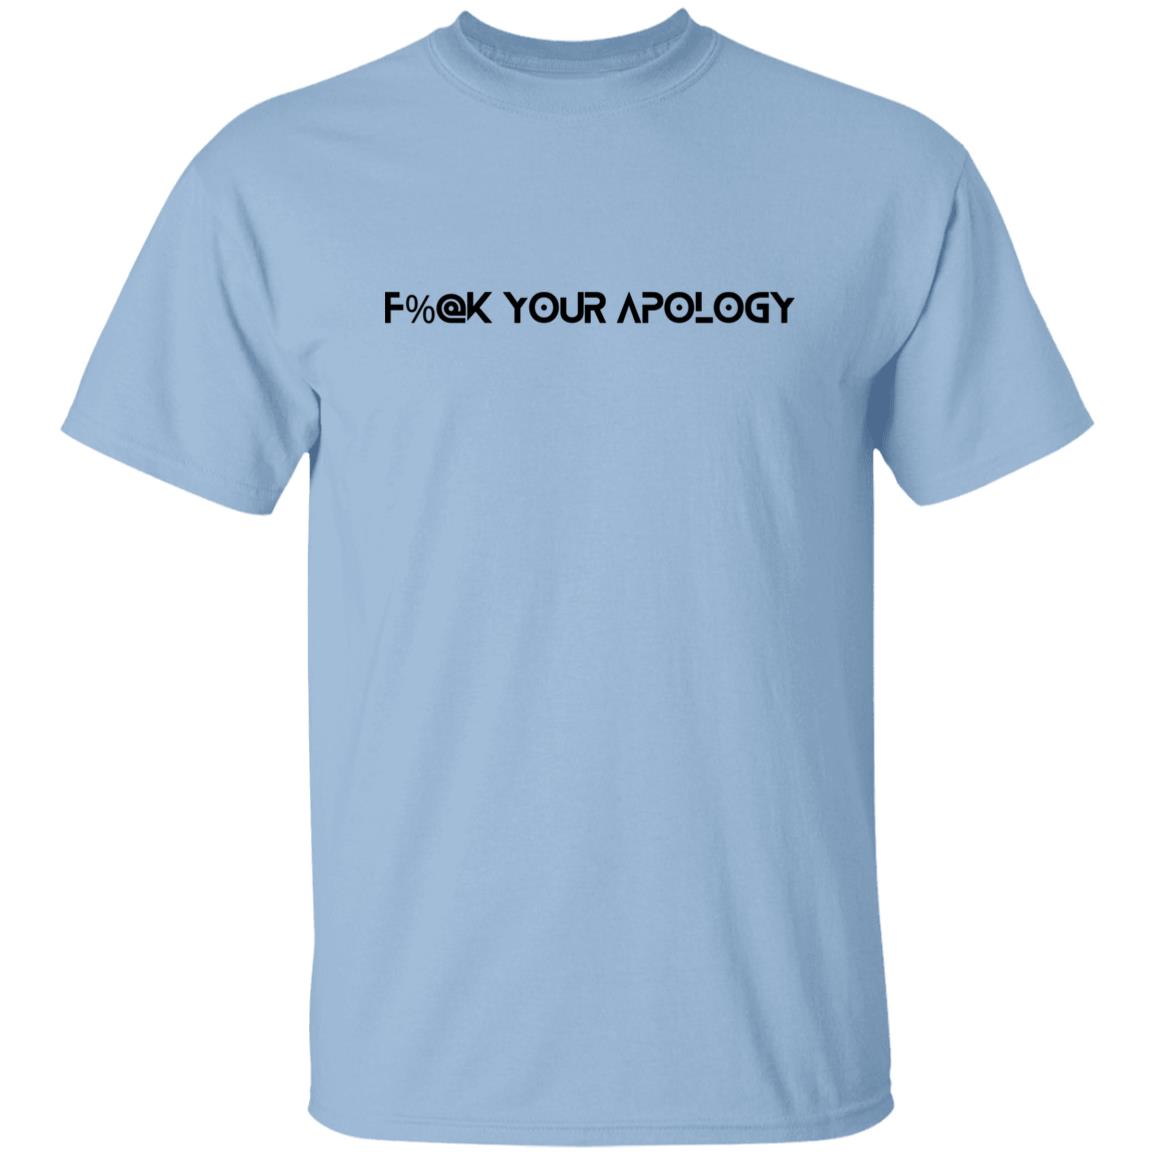 F%@k Your Apology T-Shirt